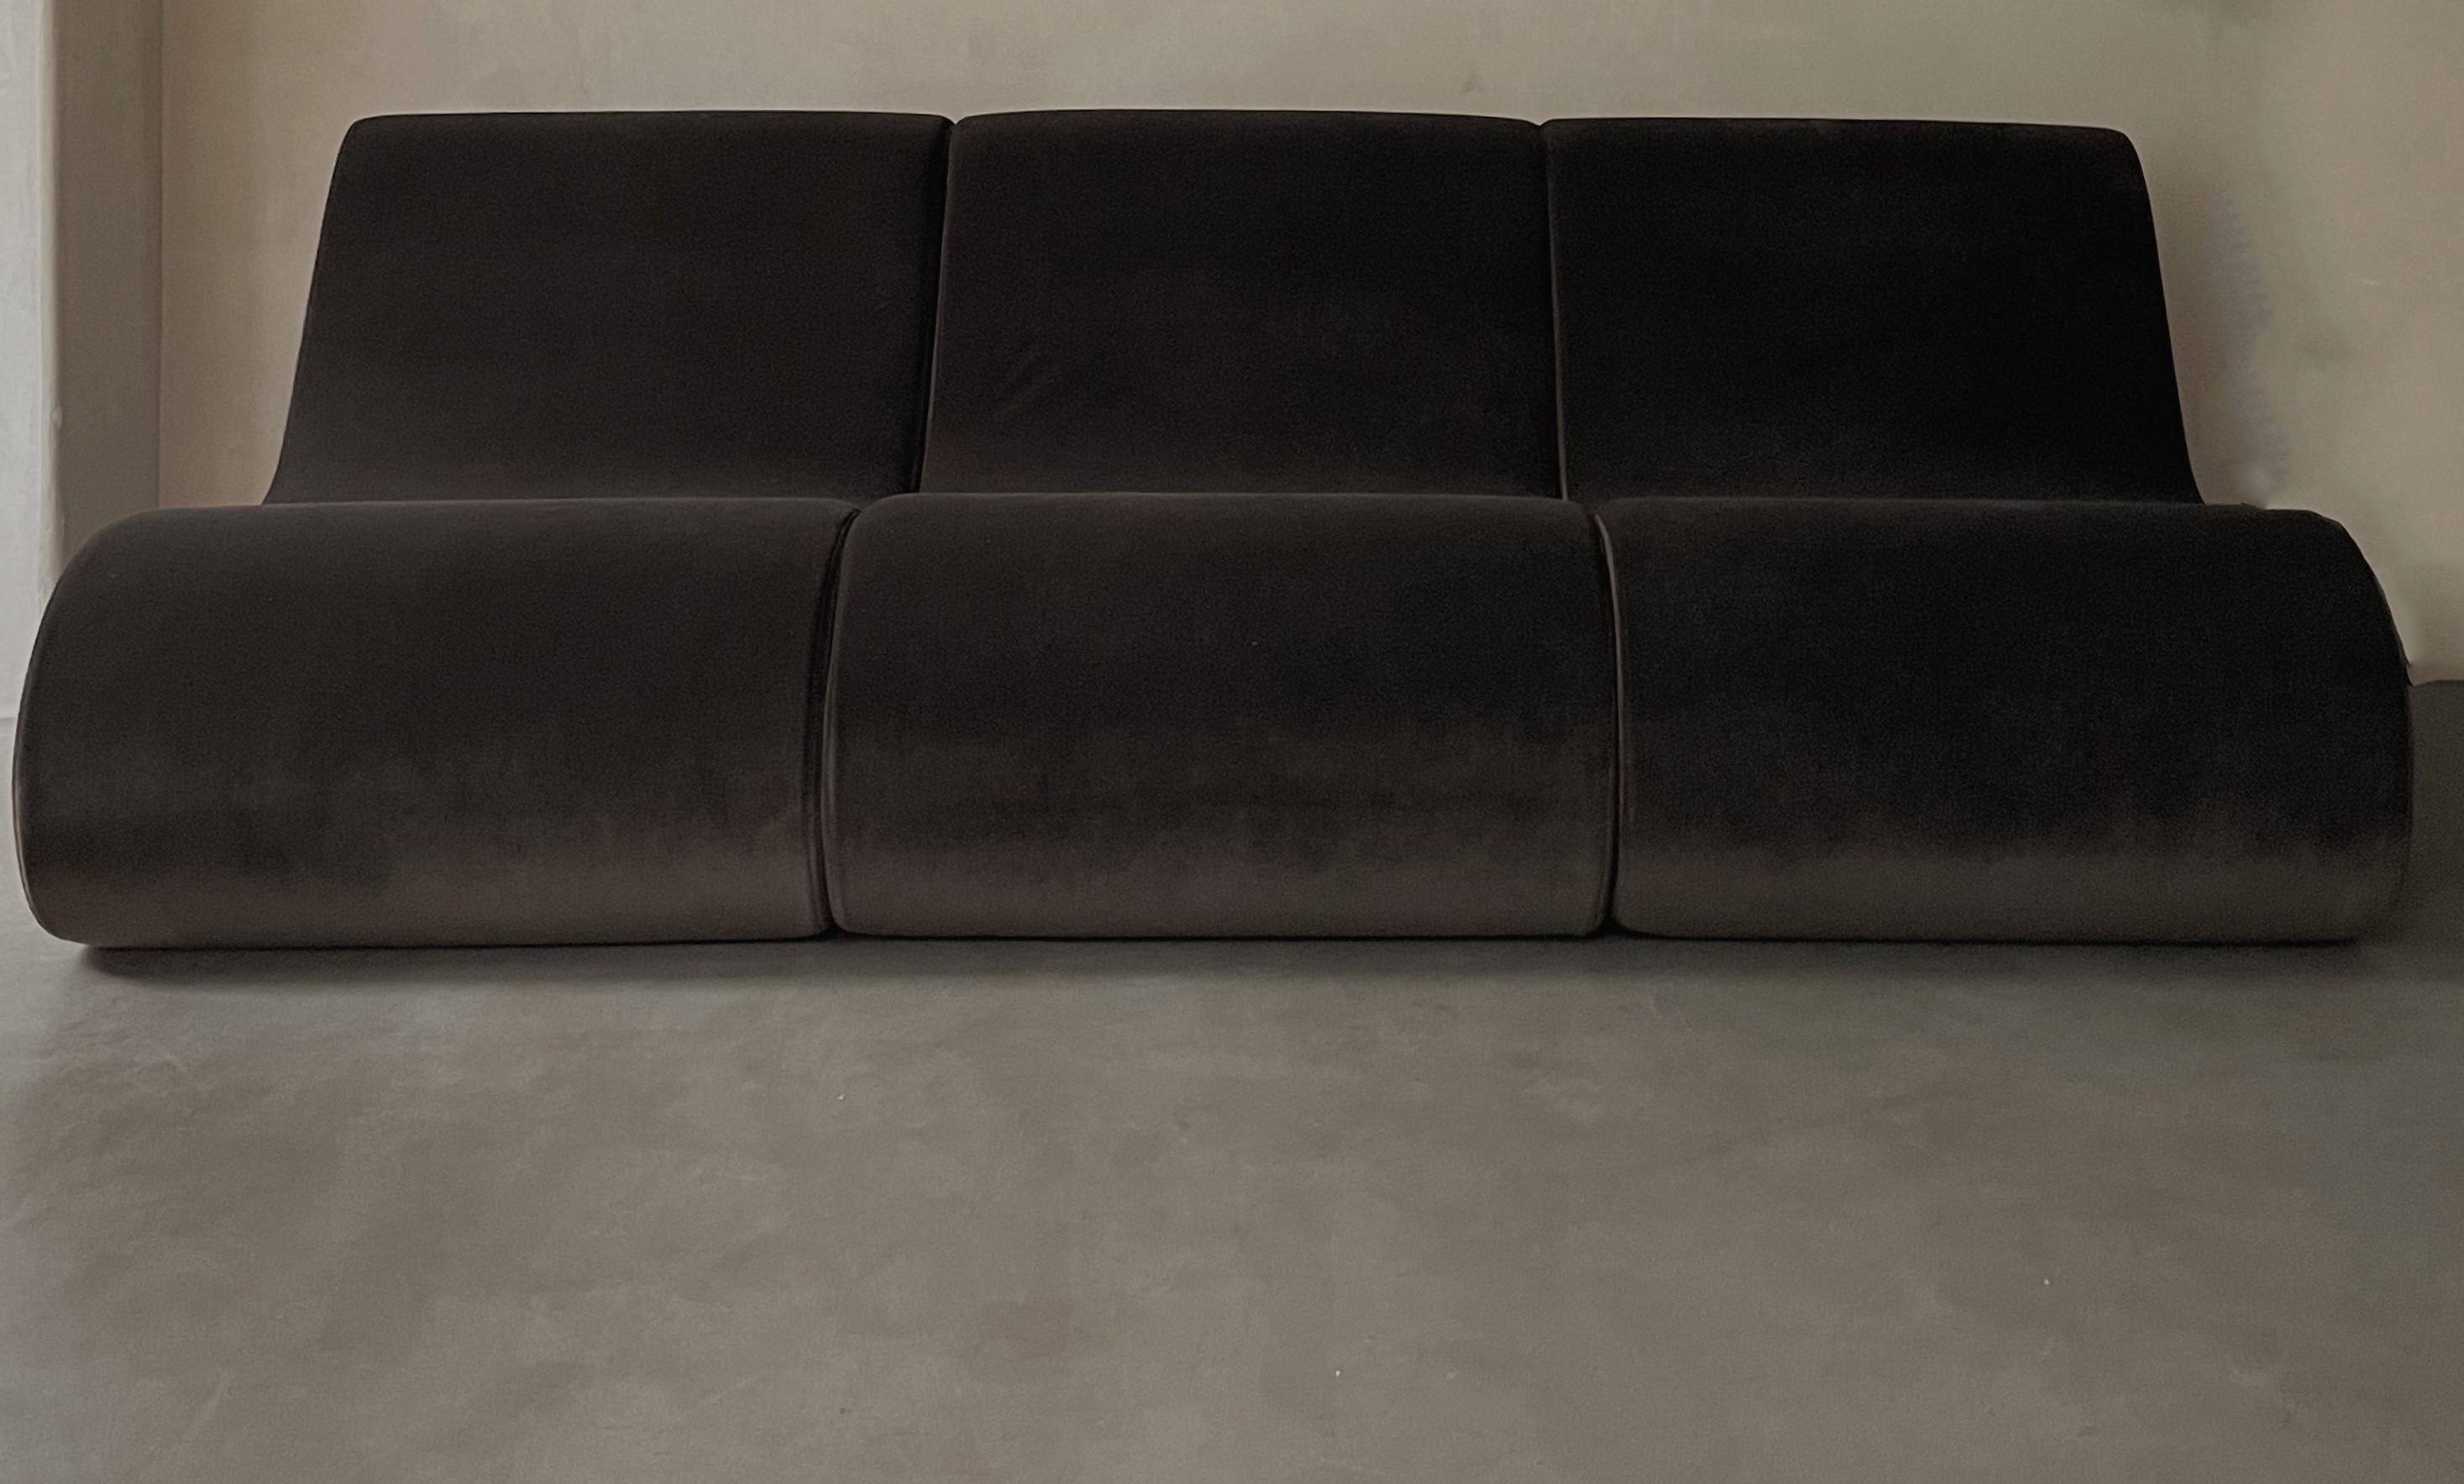 Modular sofa by kar
Dimensions: W 210 x D 105 x H 70 cm
Materials: Fabric, MDF Frame


Kar, is the root of Sanskrit Karma, meaning karmic repetition. We seek the cause and effect in aesthetics, inspired from the past, the present, and the future,